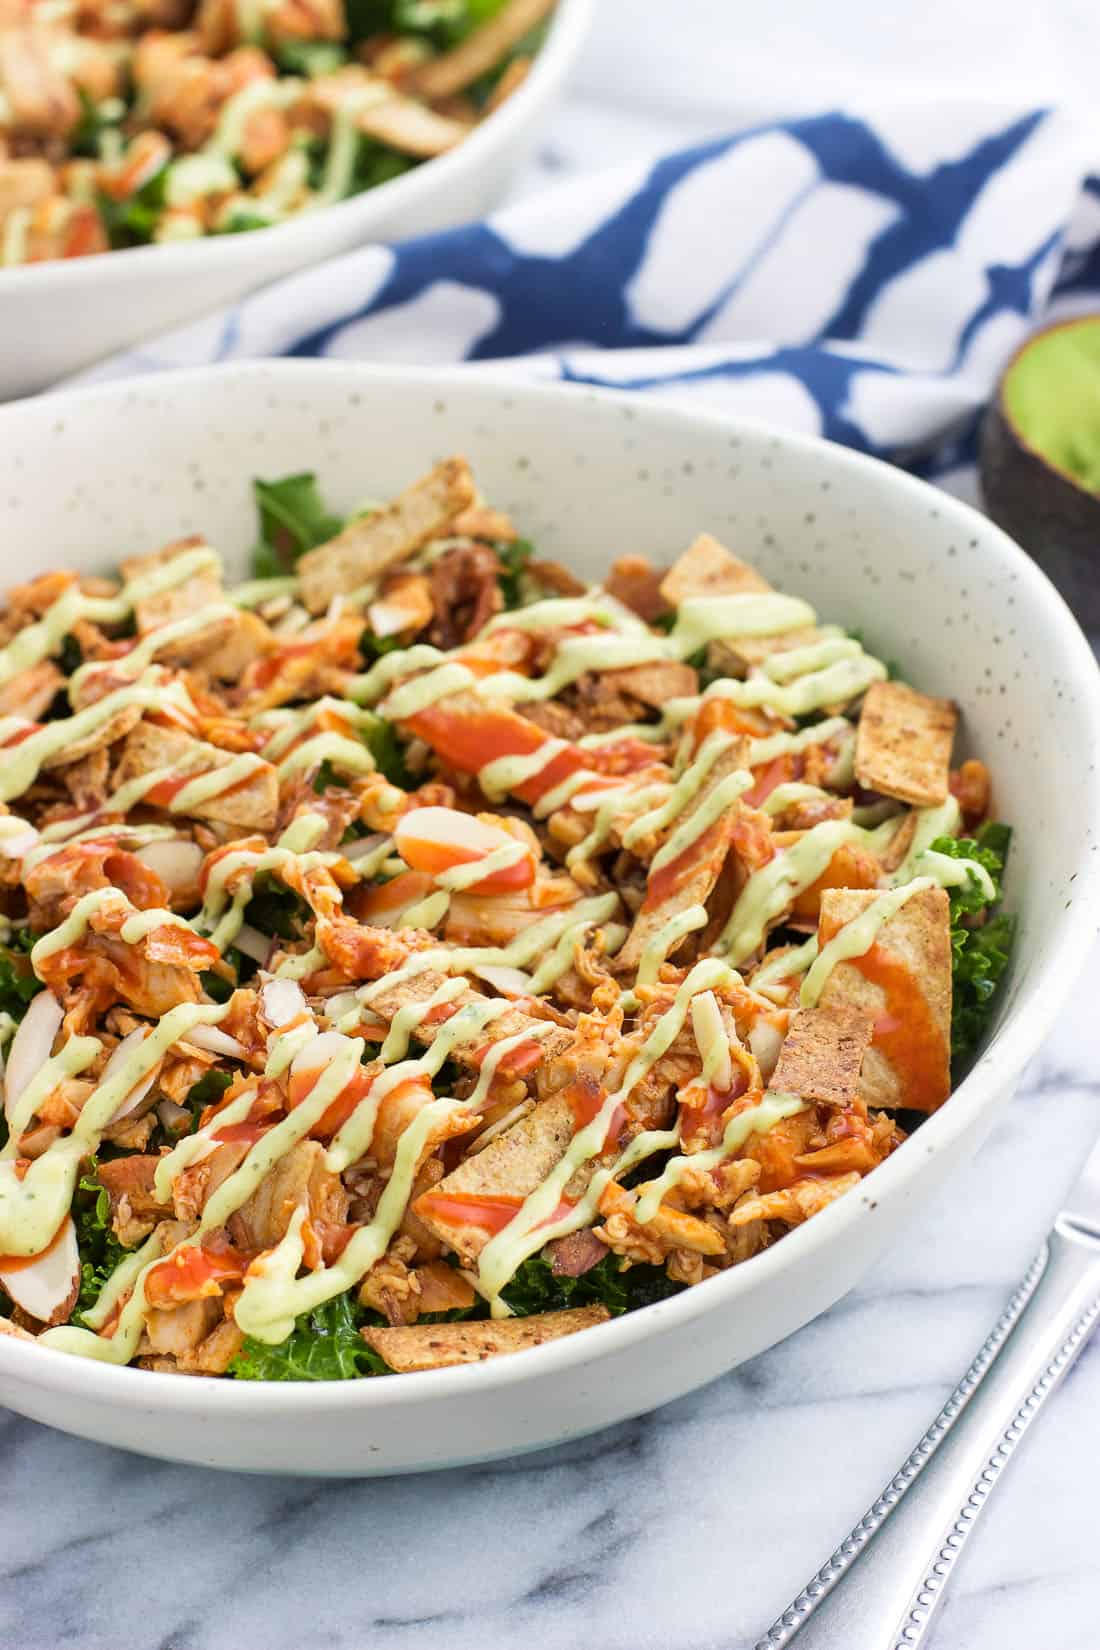 A buffalo chicken kale salad drizzled with sauce and avocado ranch dressing.